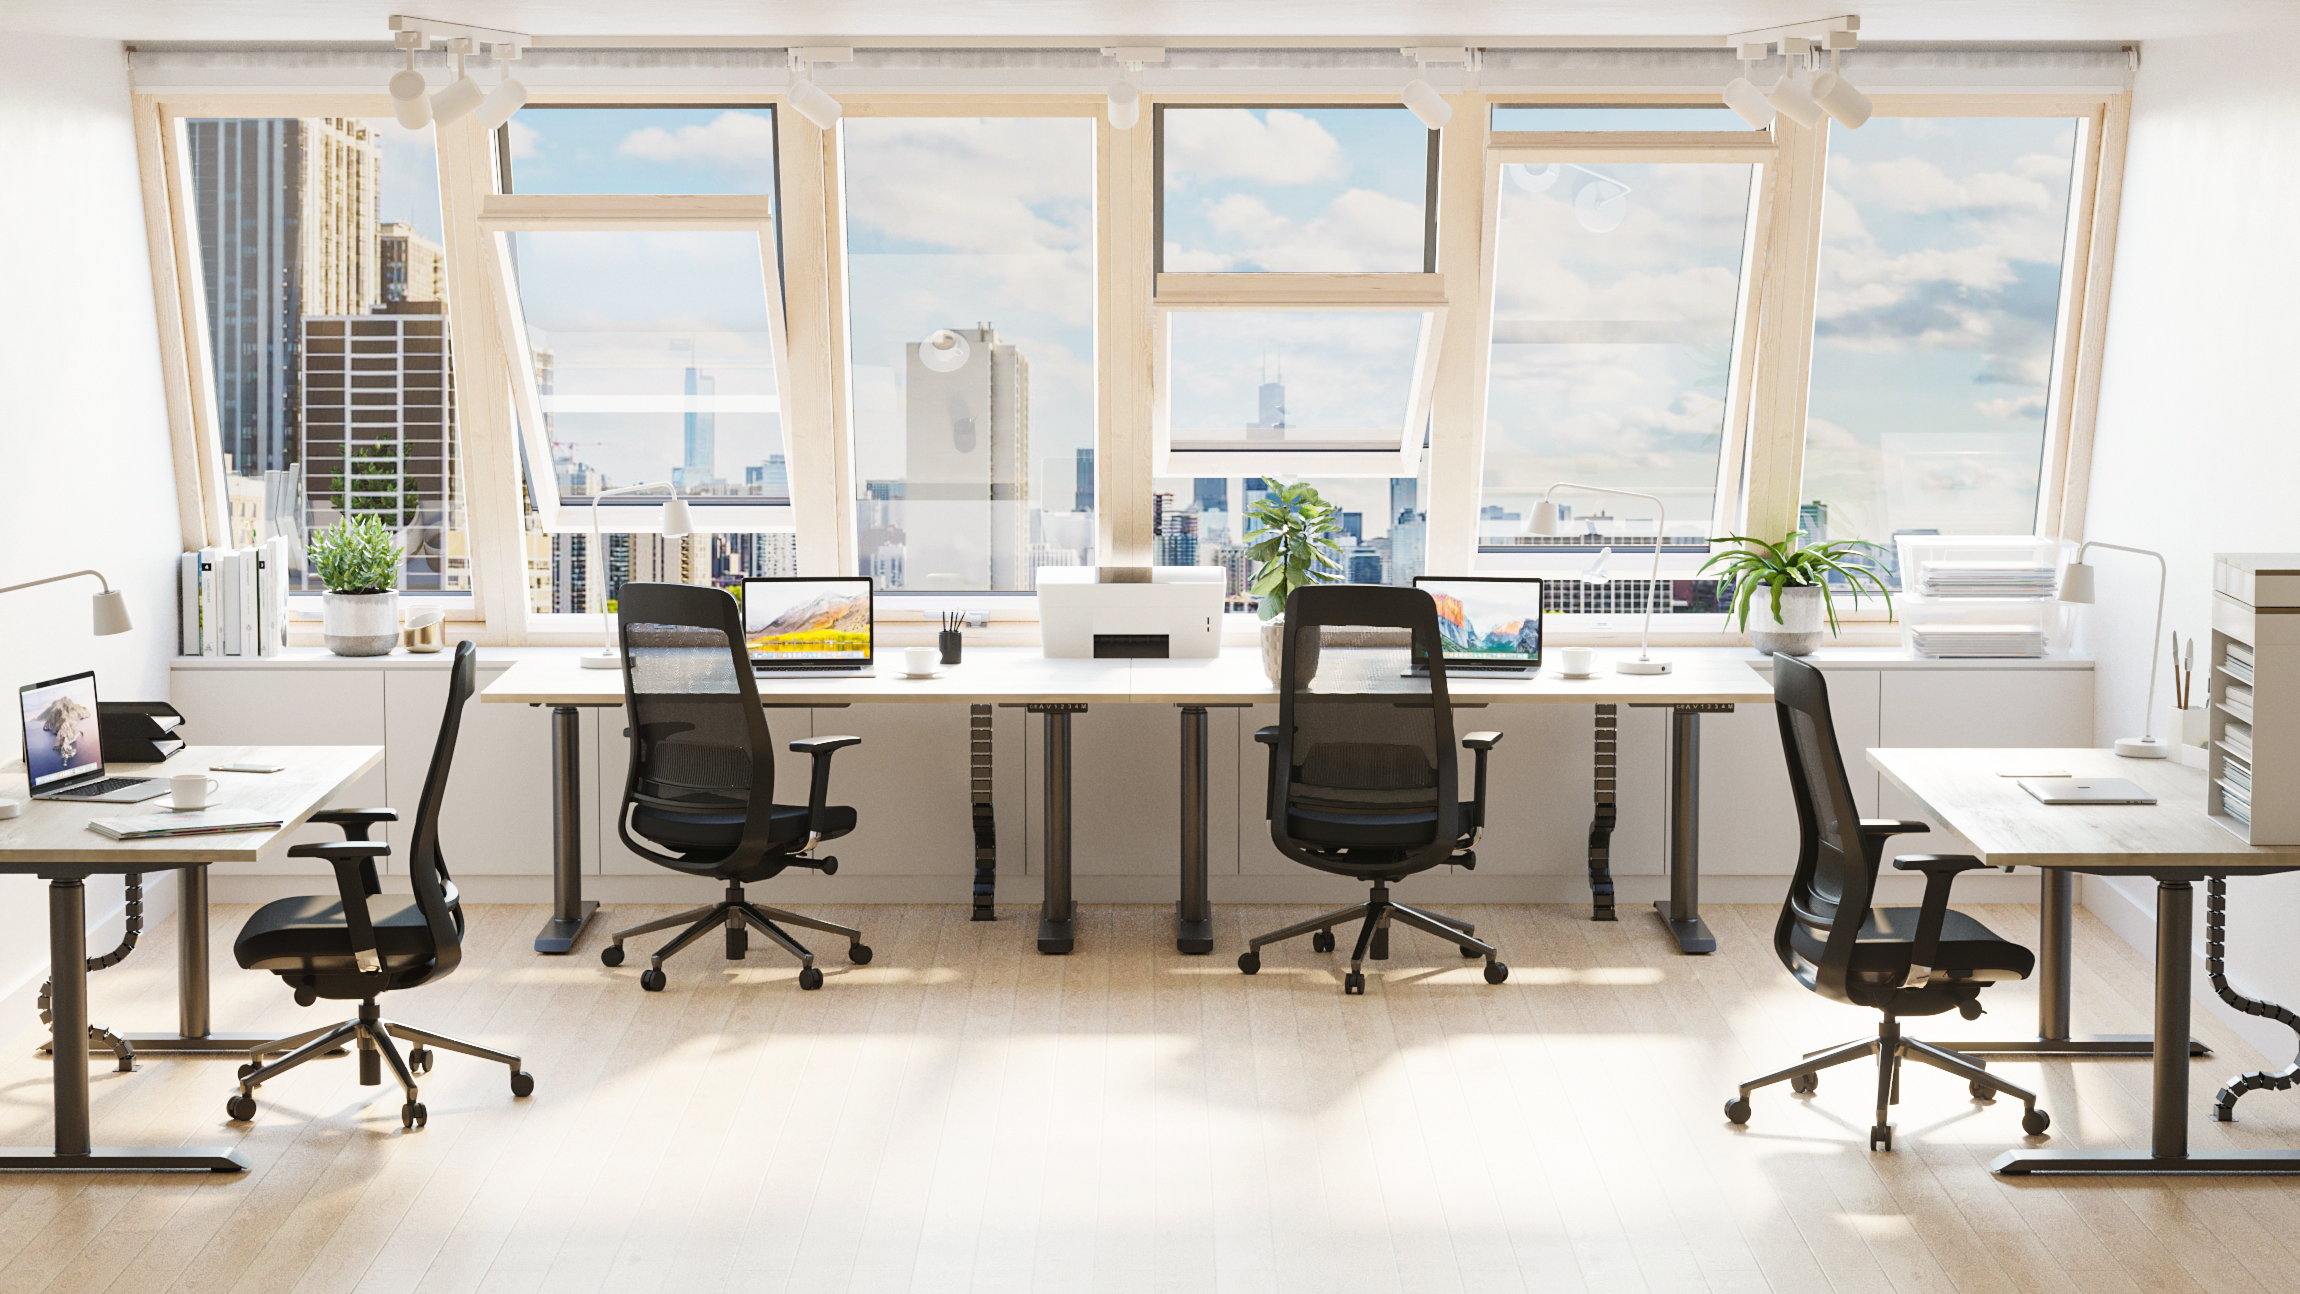 From Aches to Ease: How Ergonomic Office Chairs Can Make a Difference